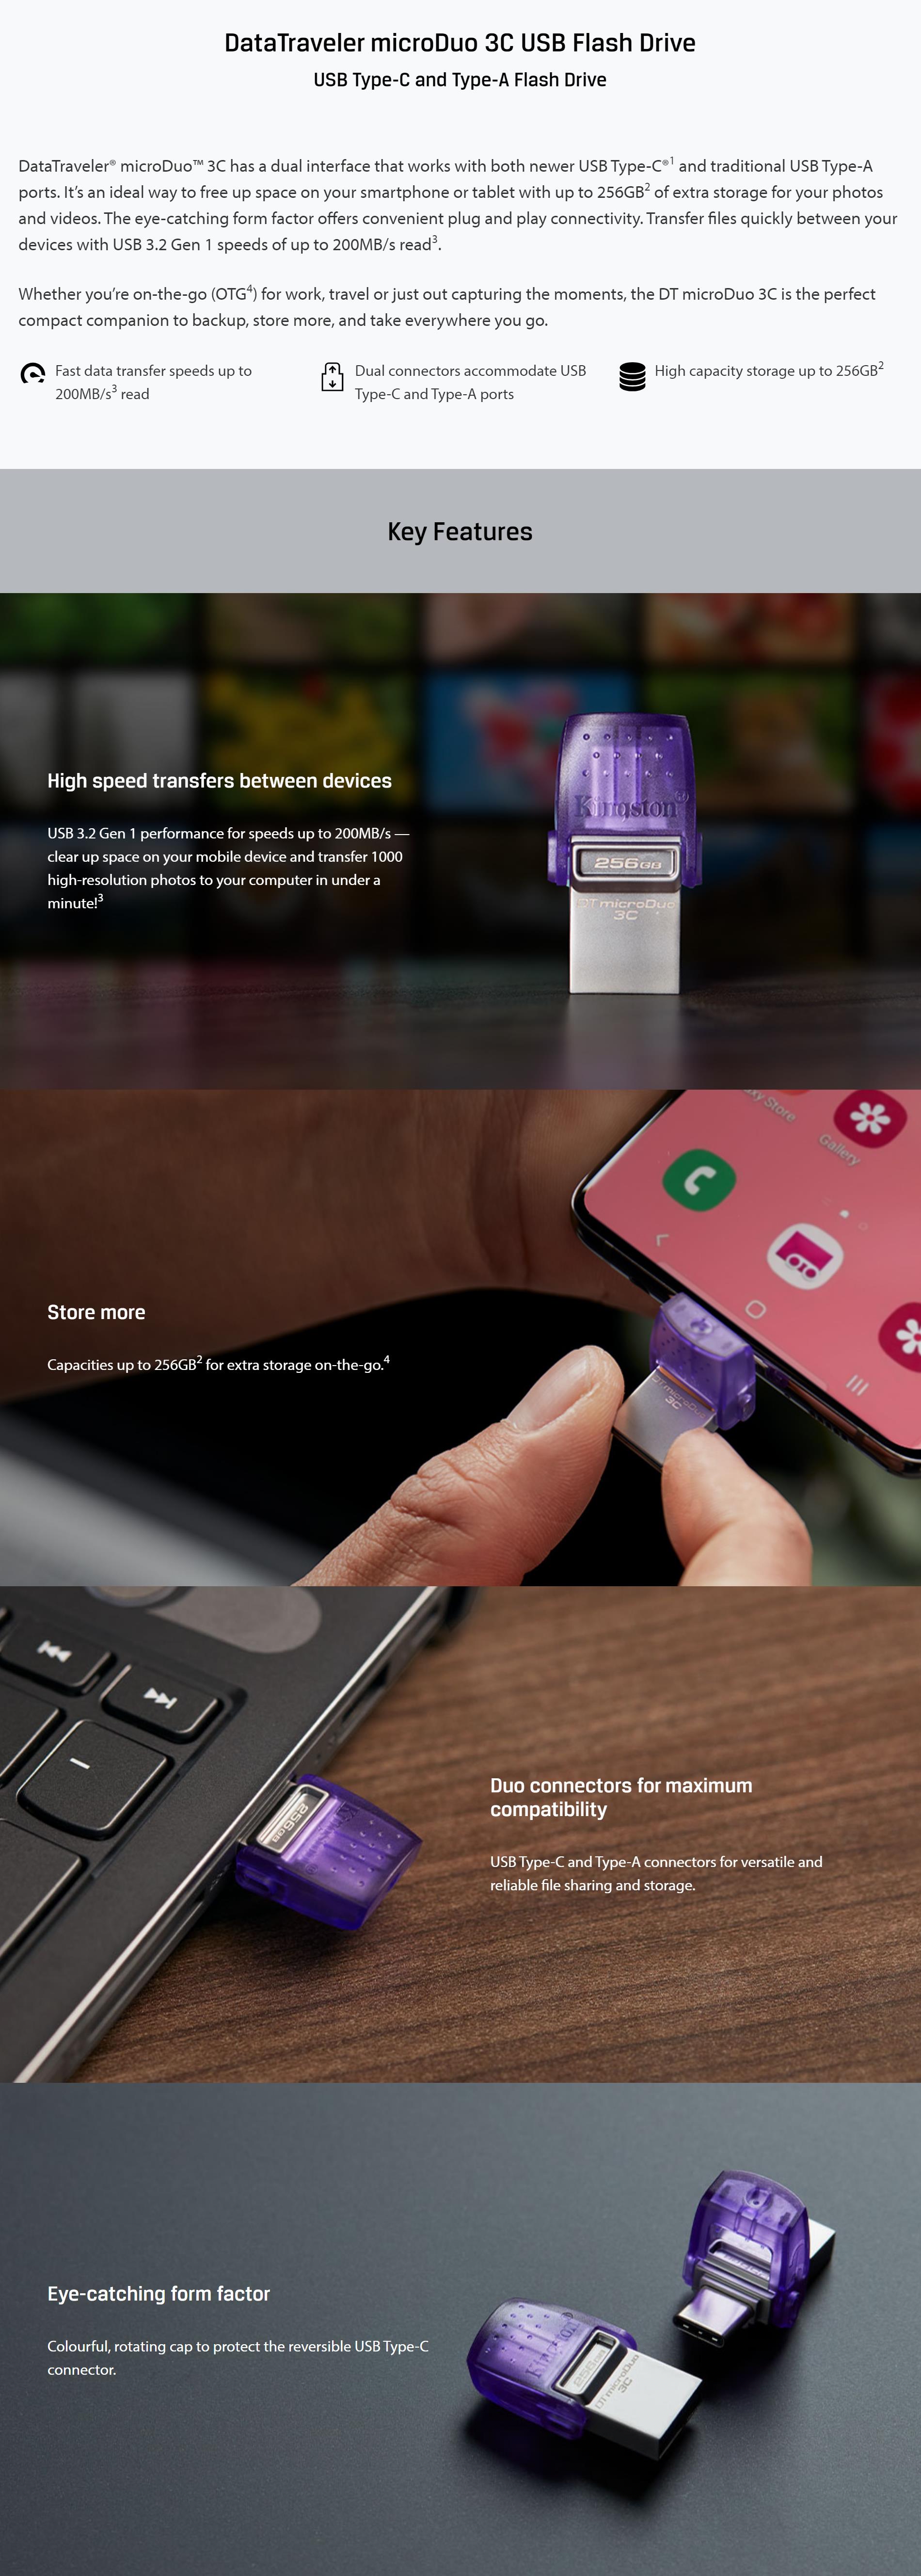 A large marketing image providing additional information about the product Kingston DataTraveler microDuo 3C USB 128GB Flash Drive - Additional alt info not provided